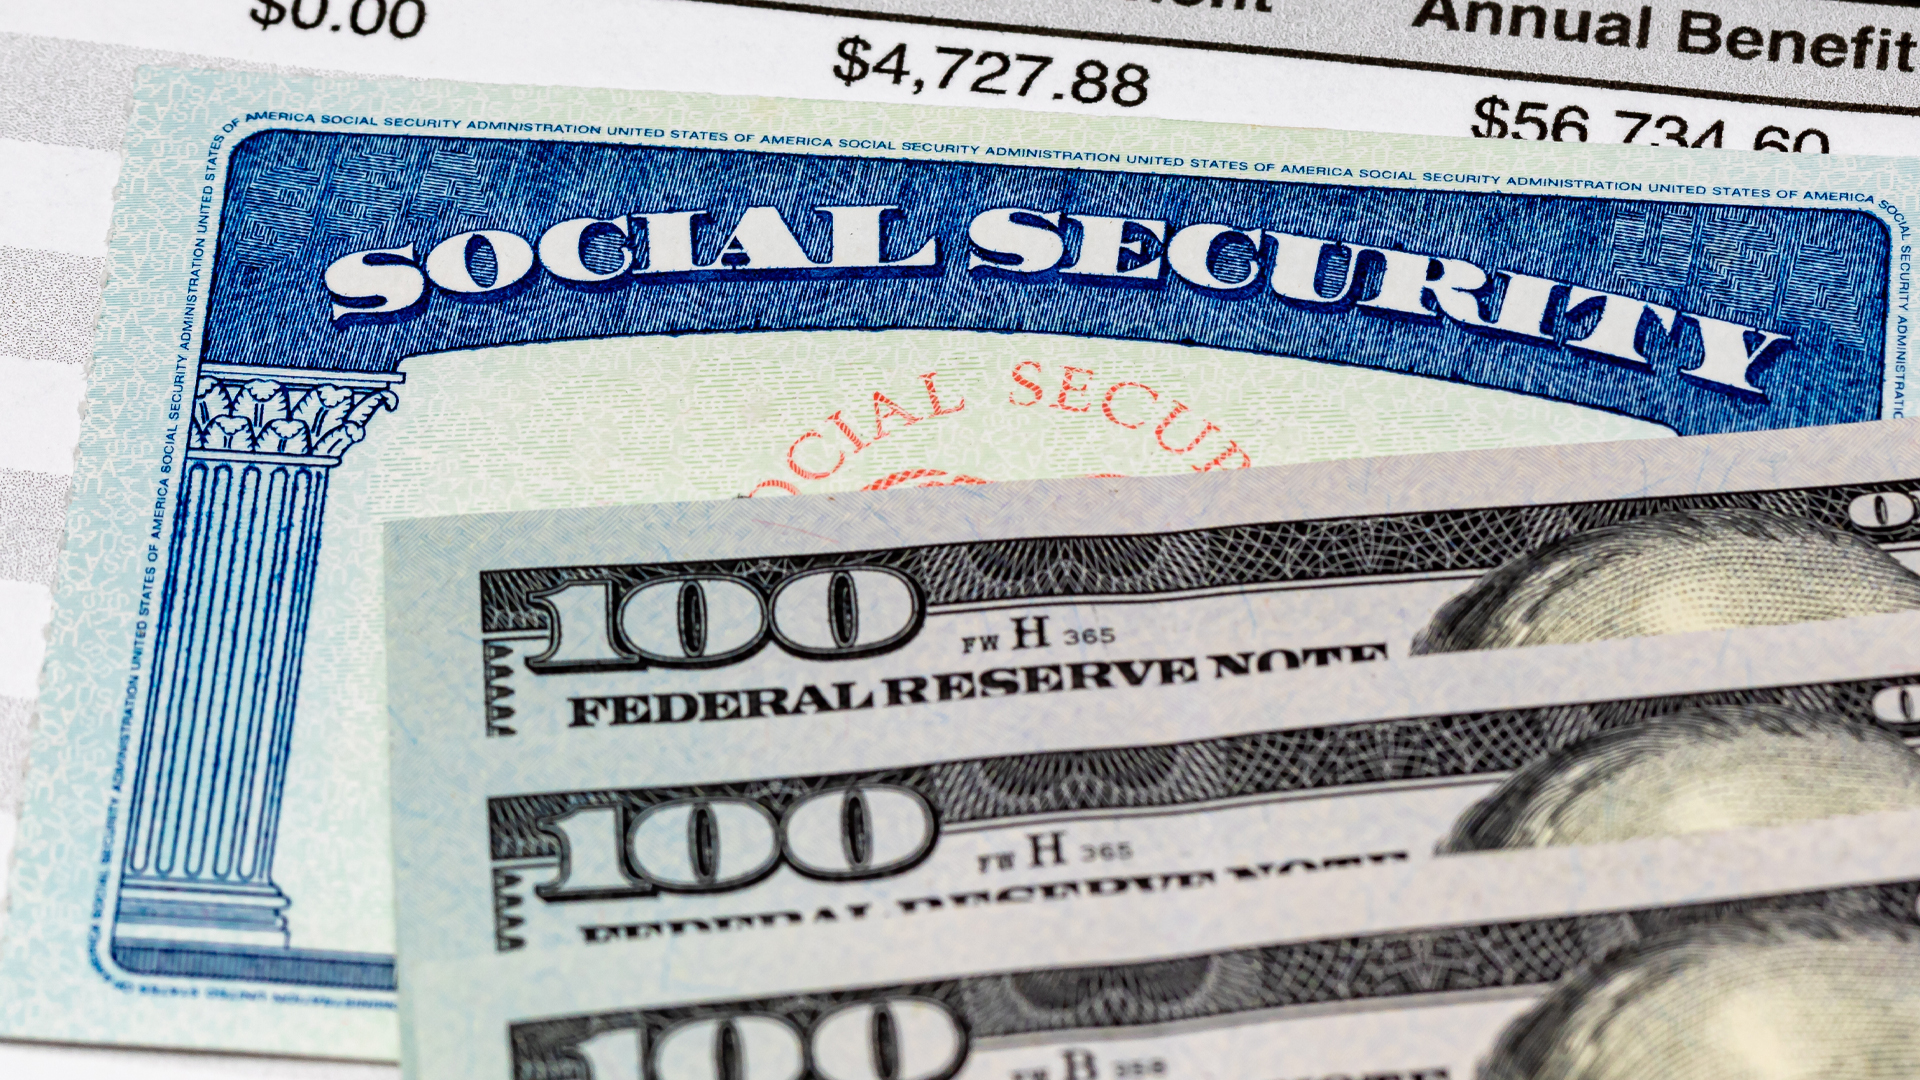 Arriving In 9 Days Is The First Increased Direct SSI Payment Worth $914 - Update On Social Security